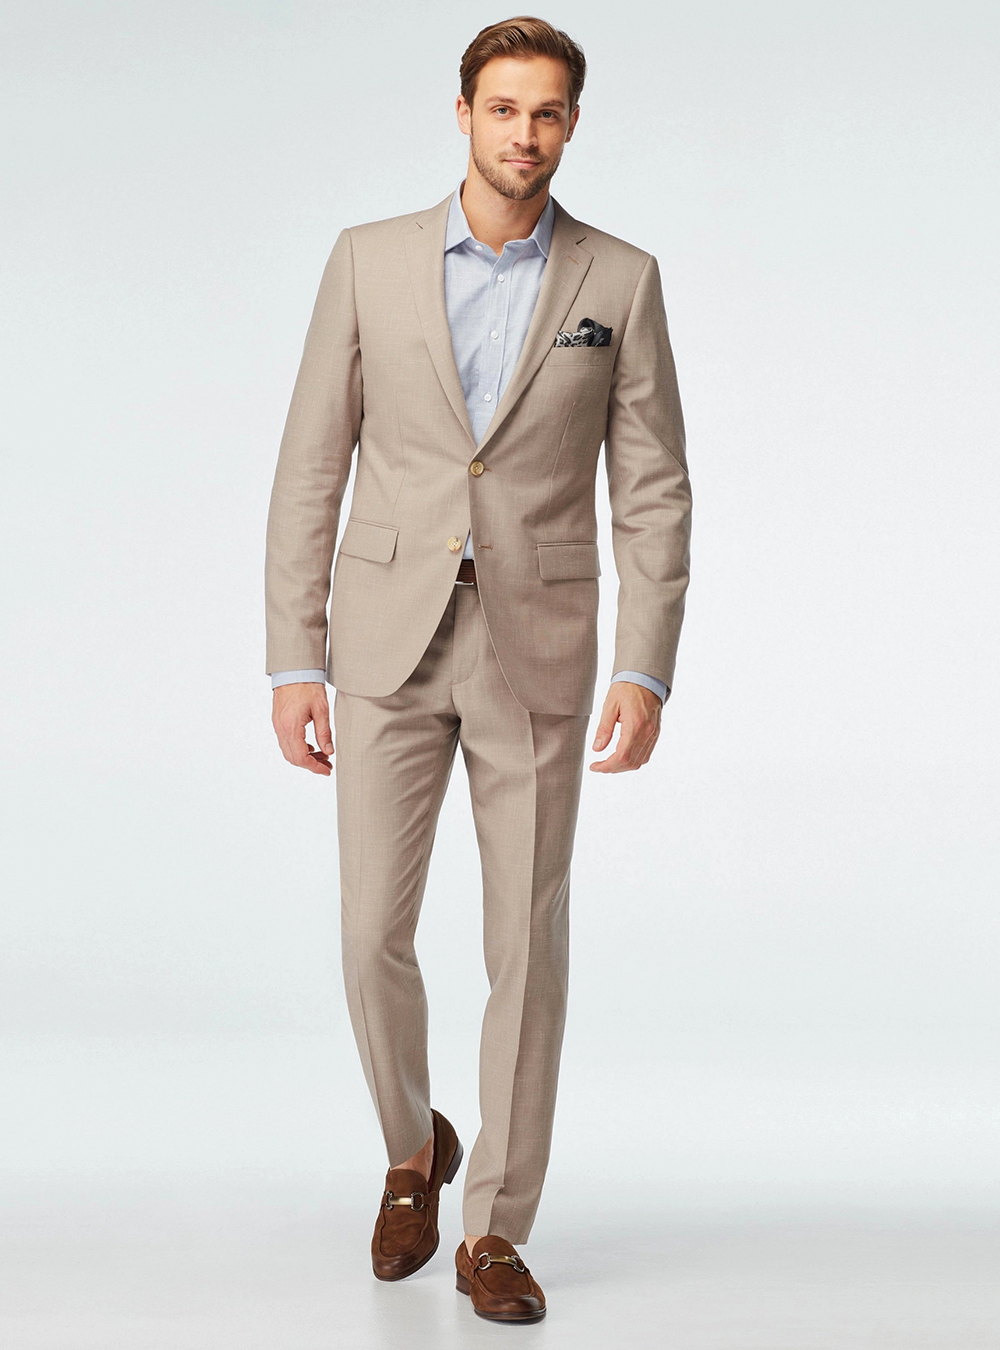 Men's suit combinations from JOOP! available on the official store